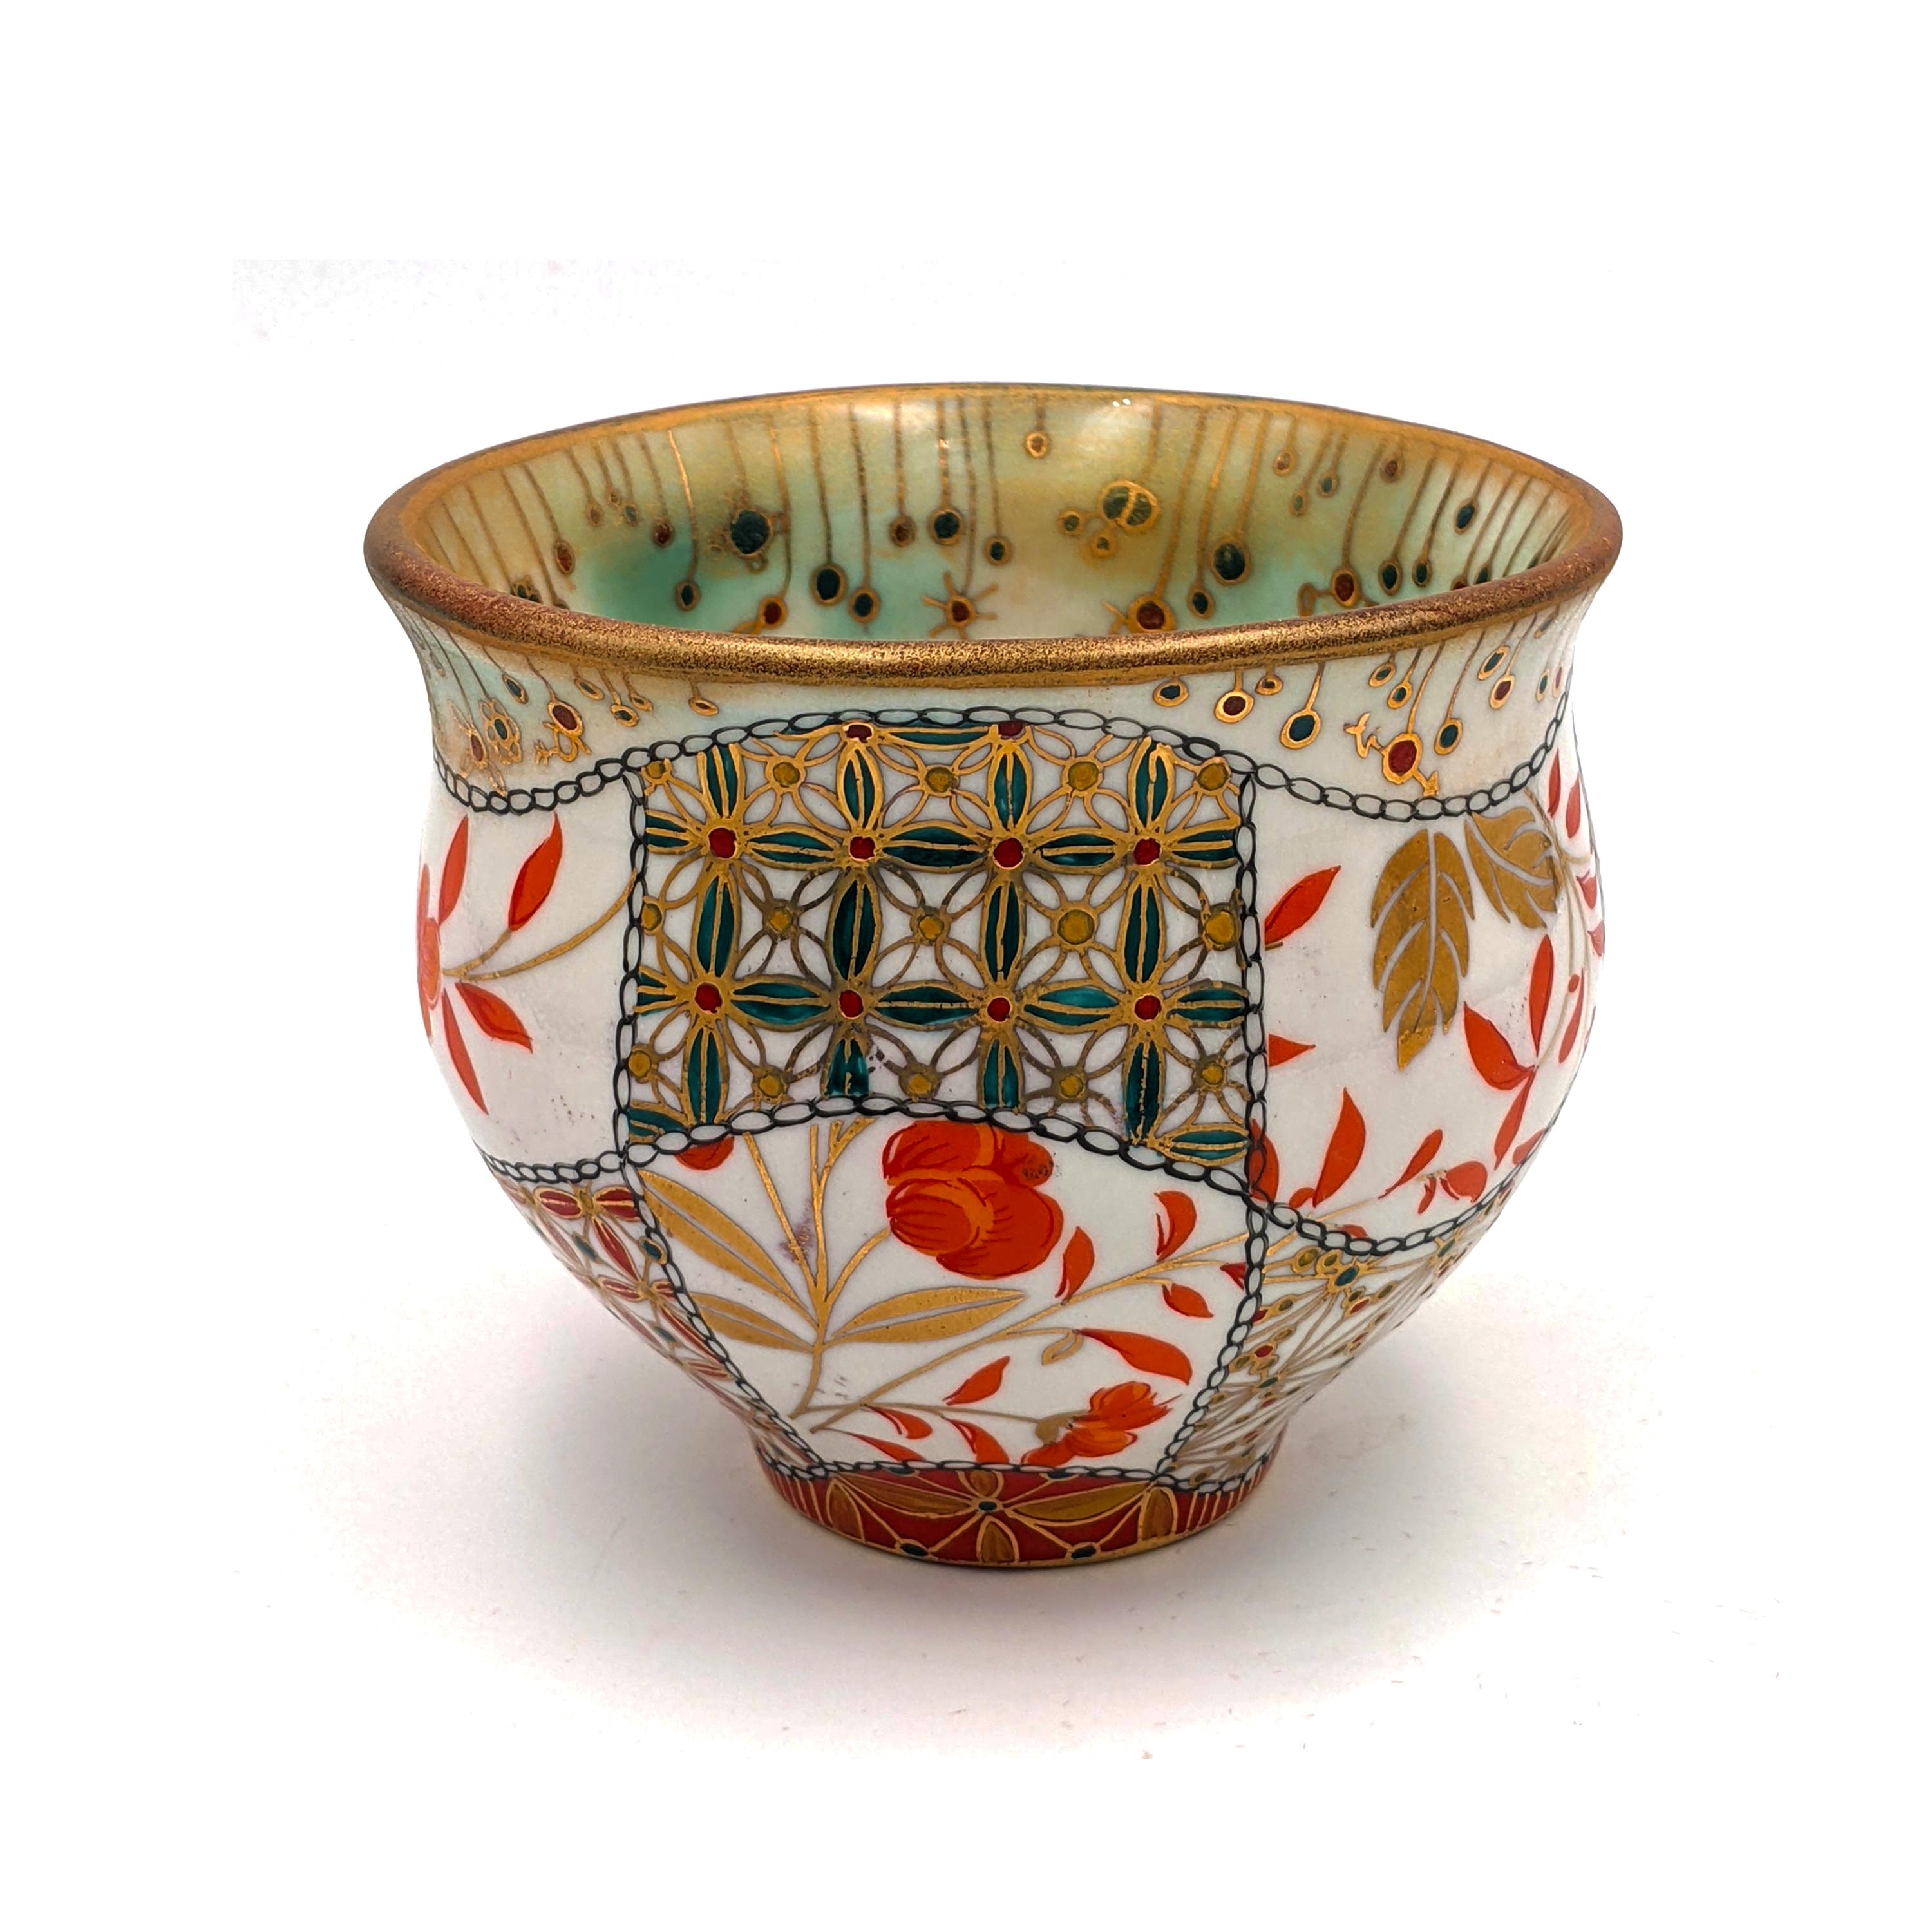 Tu Me Connais - Yunomi (MADE TO ORDER) (Hand-painted, hand-made, porcelain)